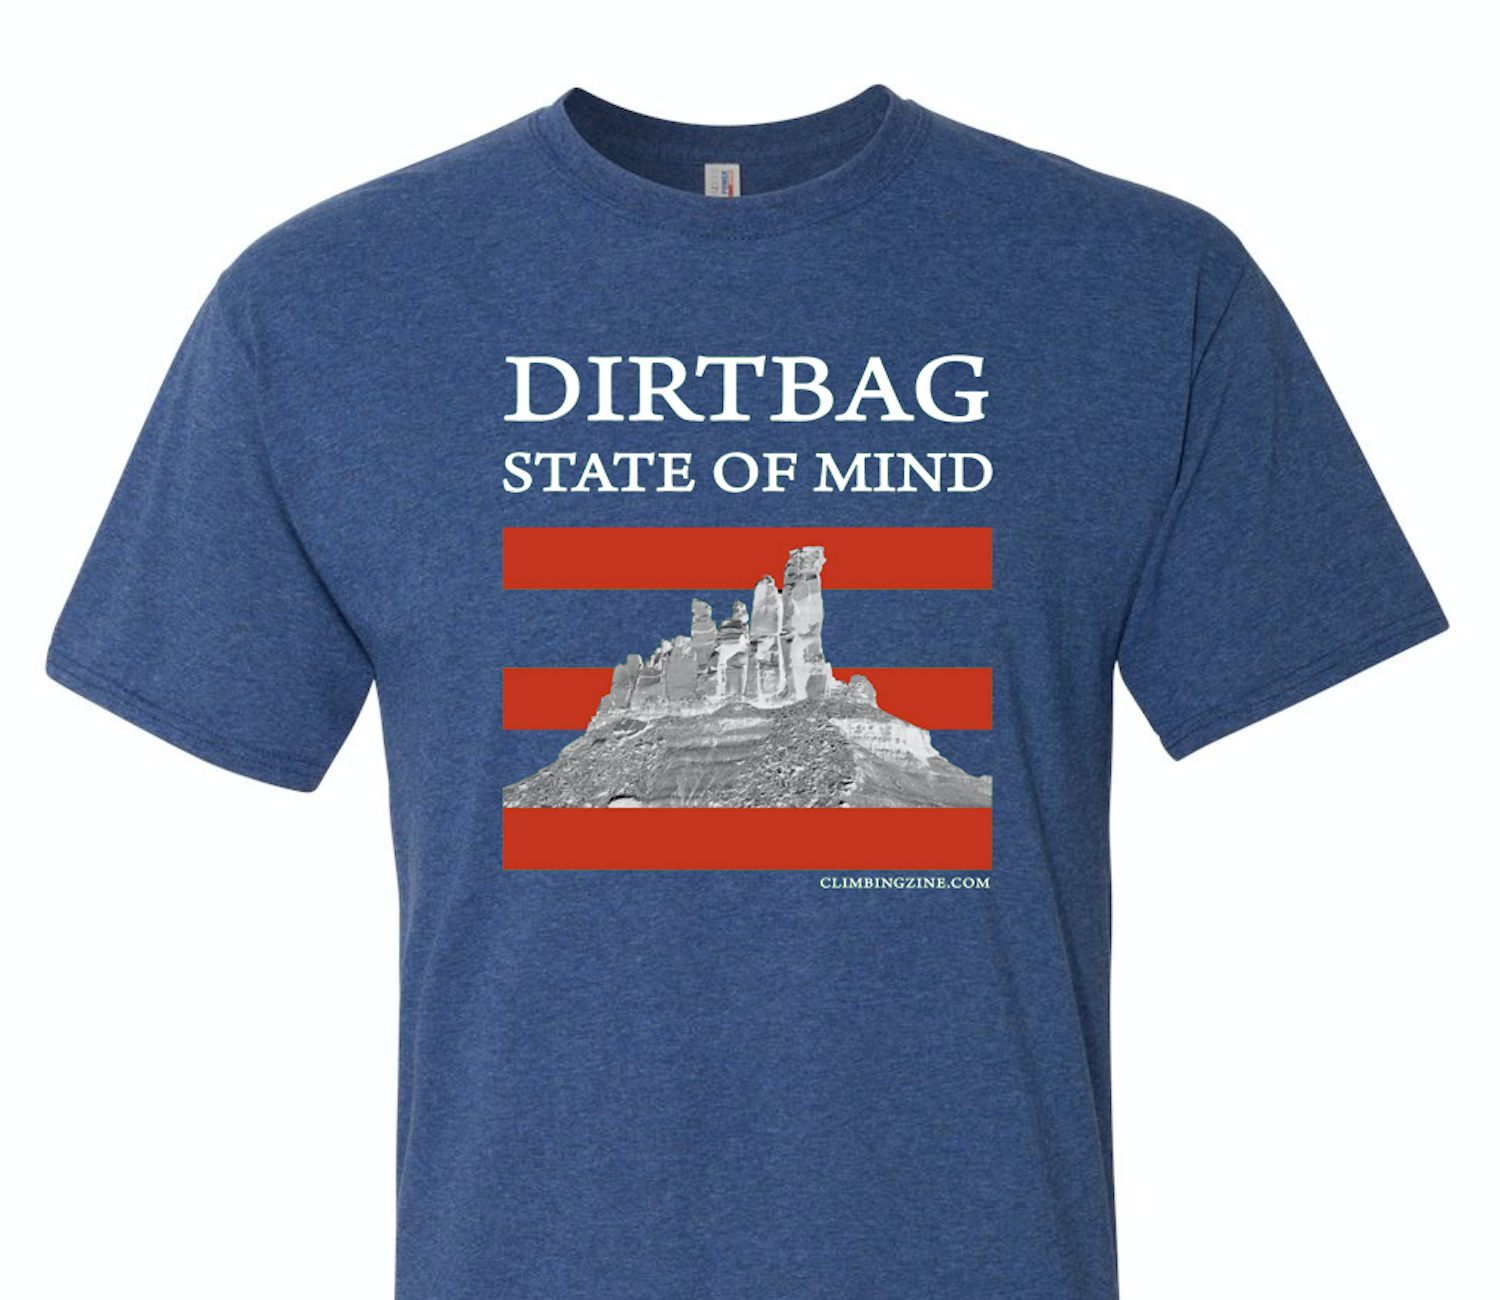 State of Mind' Shirt